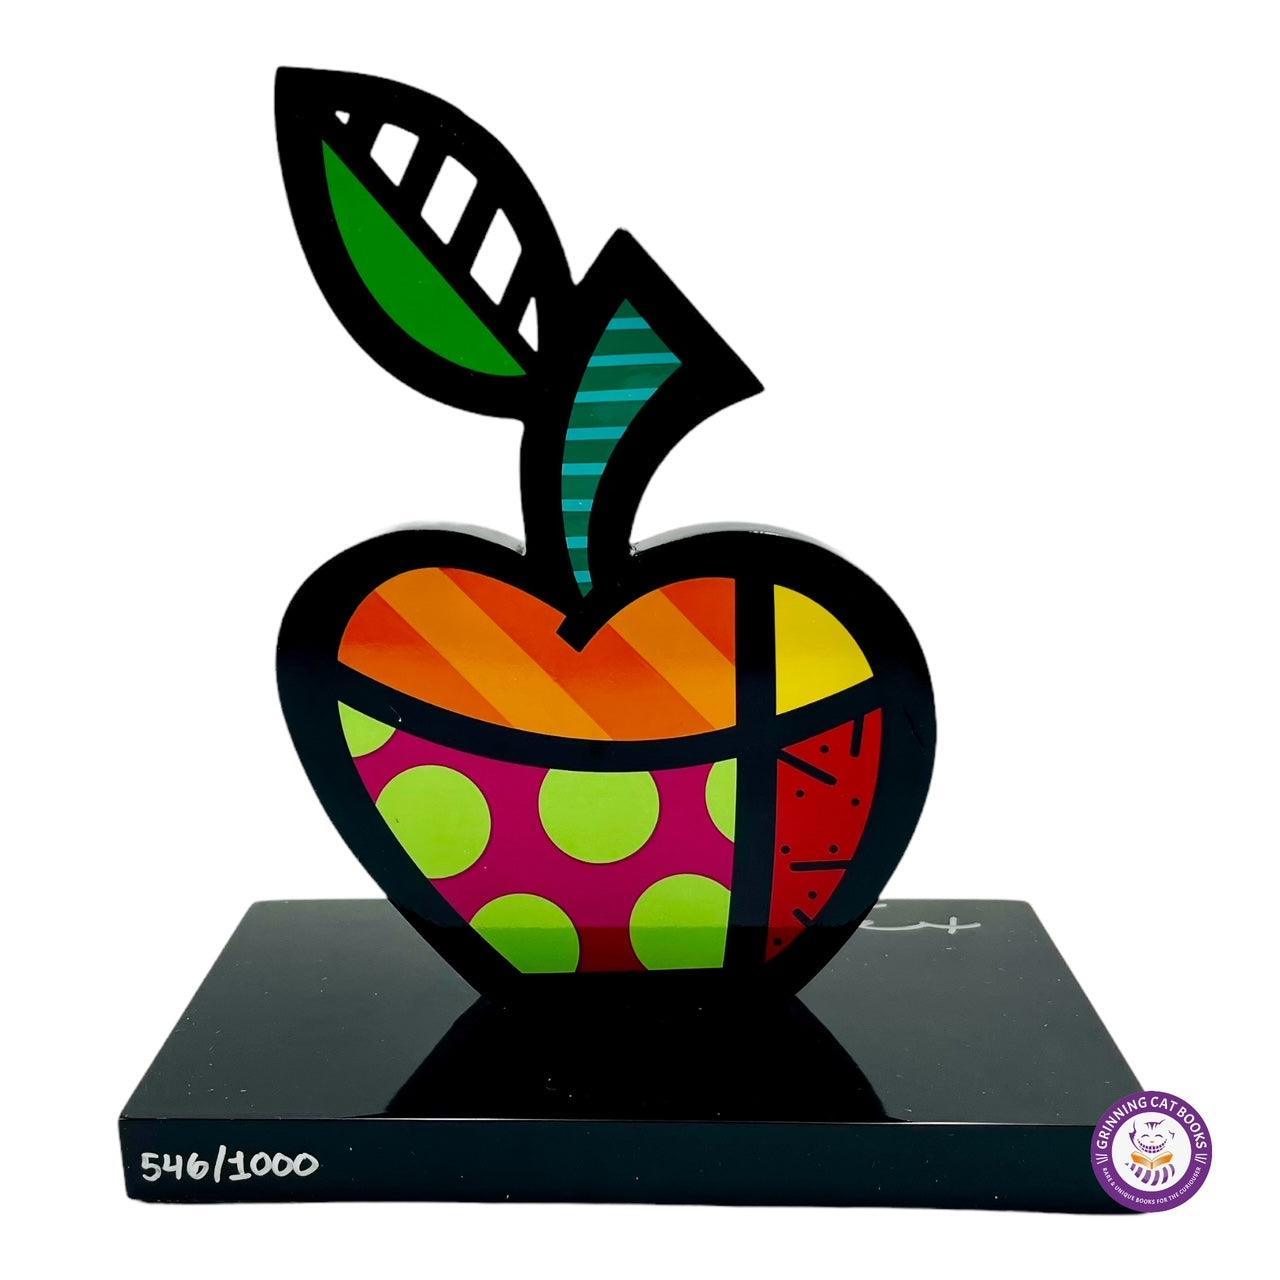 Romero Britto's "Big Apple" together with Romero Britto Deluxe Edition (each a Limited Edition of only 1,000 and signed by the artist) - Grinning Cat Books - ART - ARTWORK